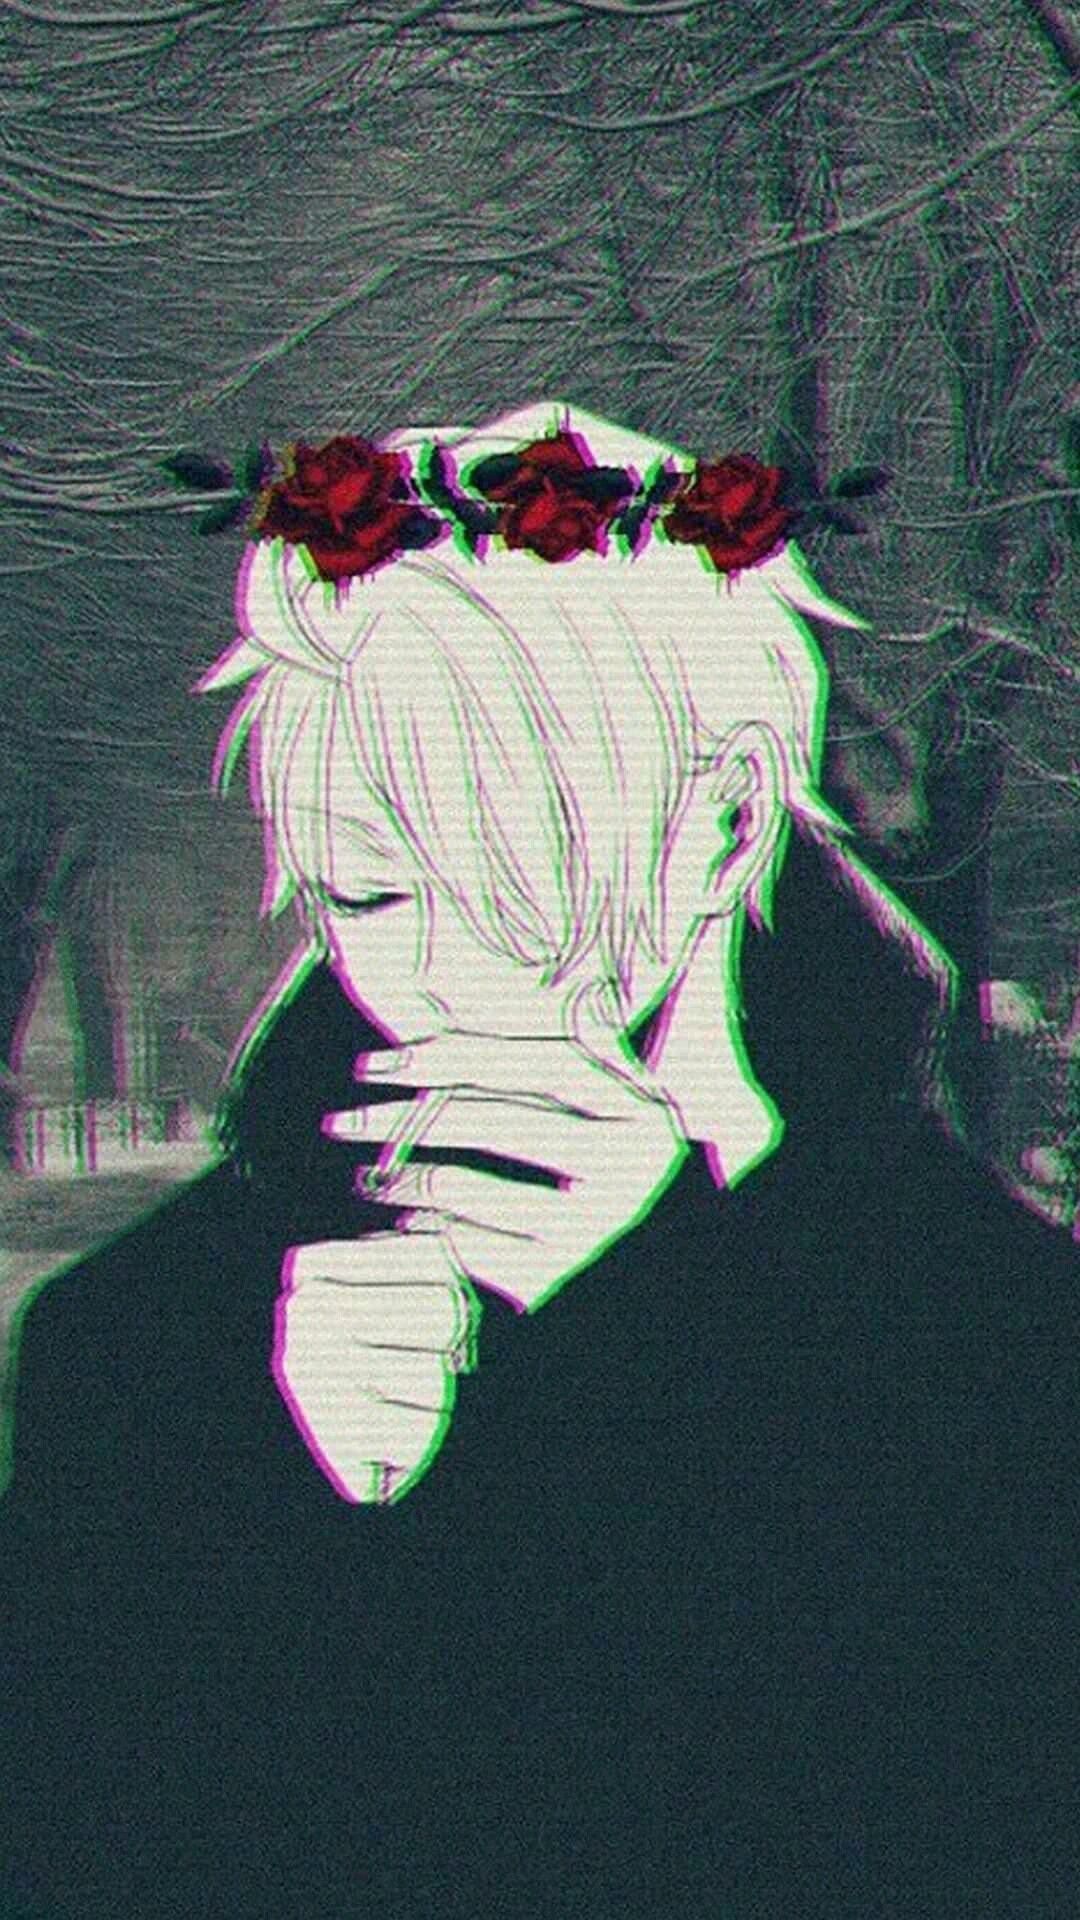 A man with roses in his hair - Profile picture, sad